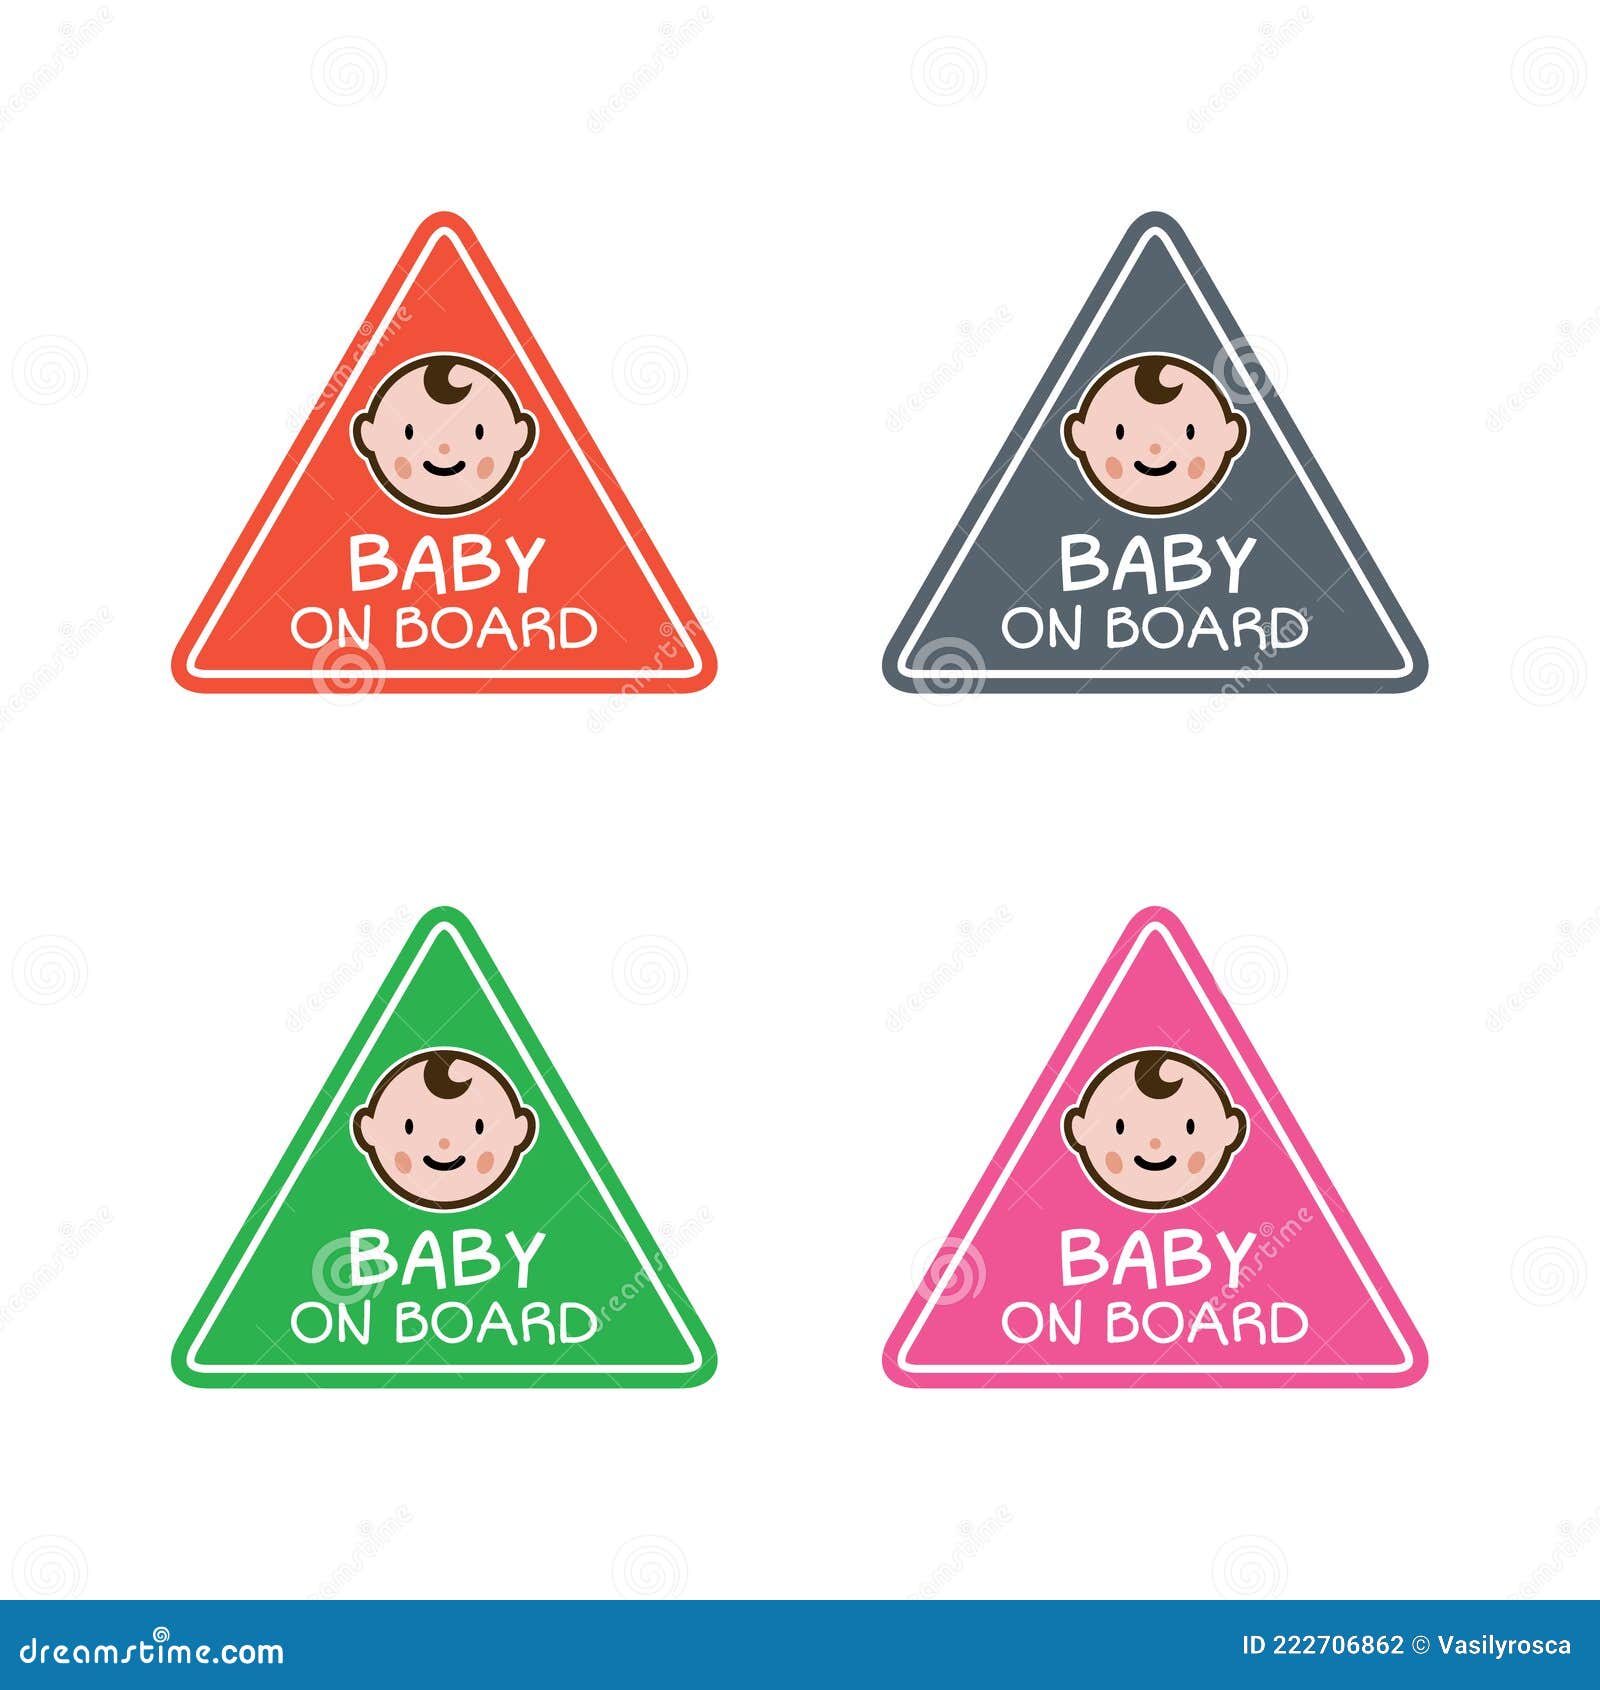 Baby On Board Sticker For Cars To Warn Other Drivers That Kids Are